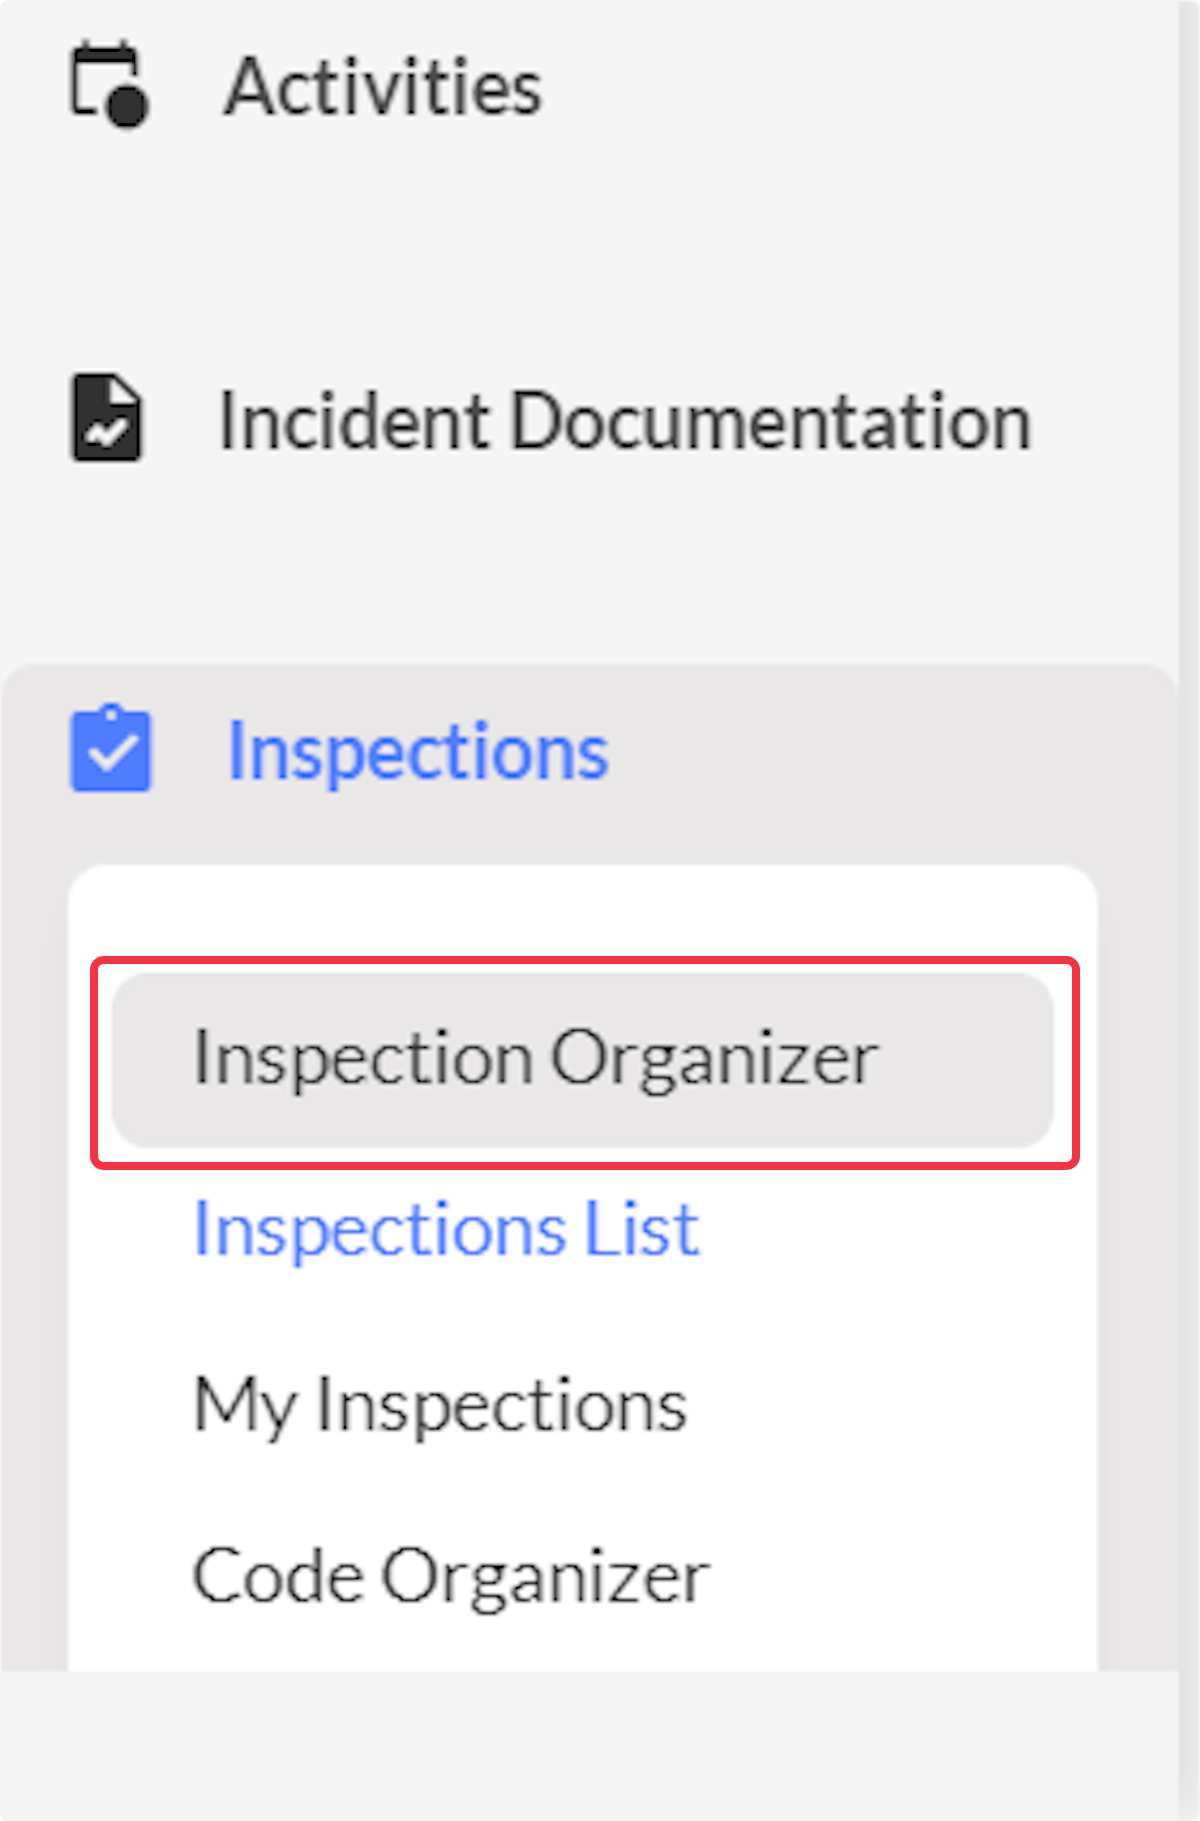 Click on Inspection Organizer